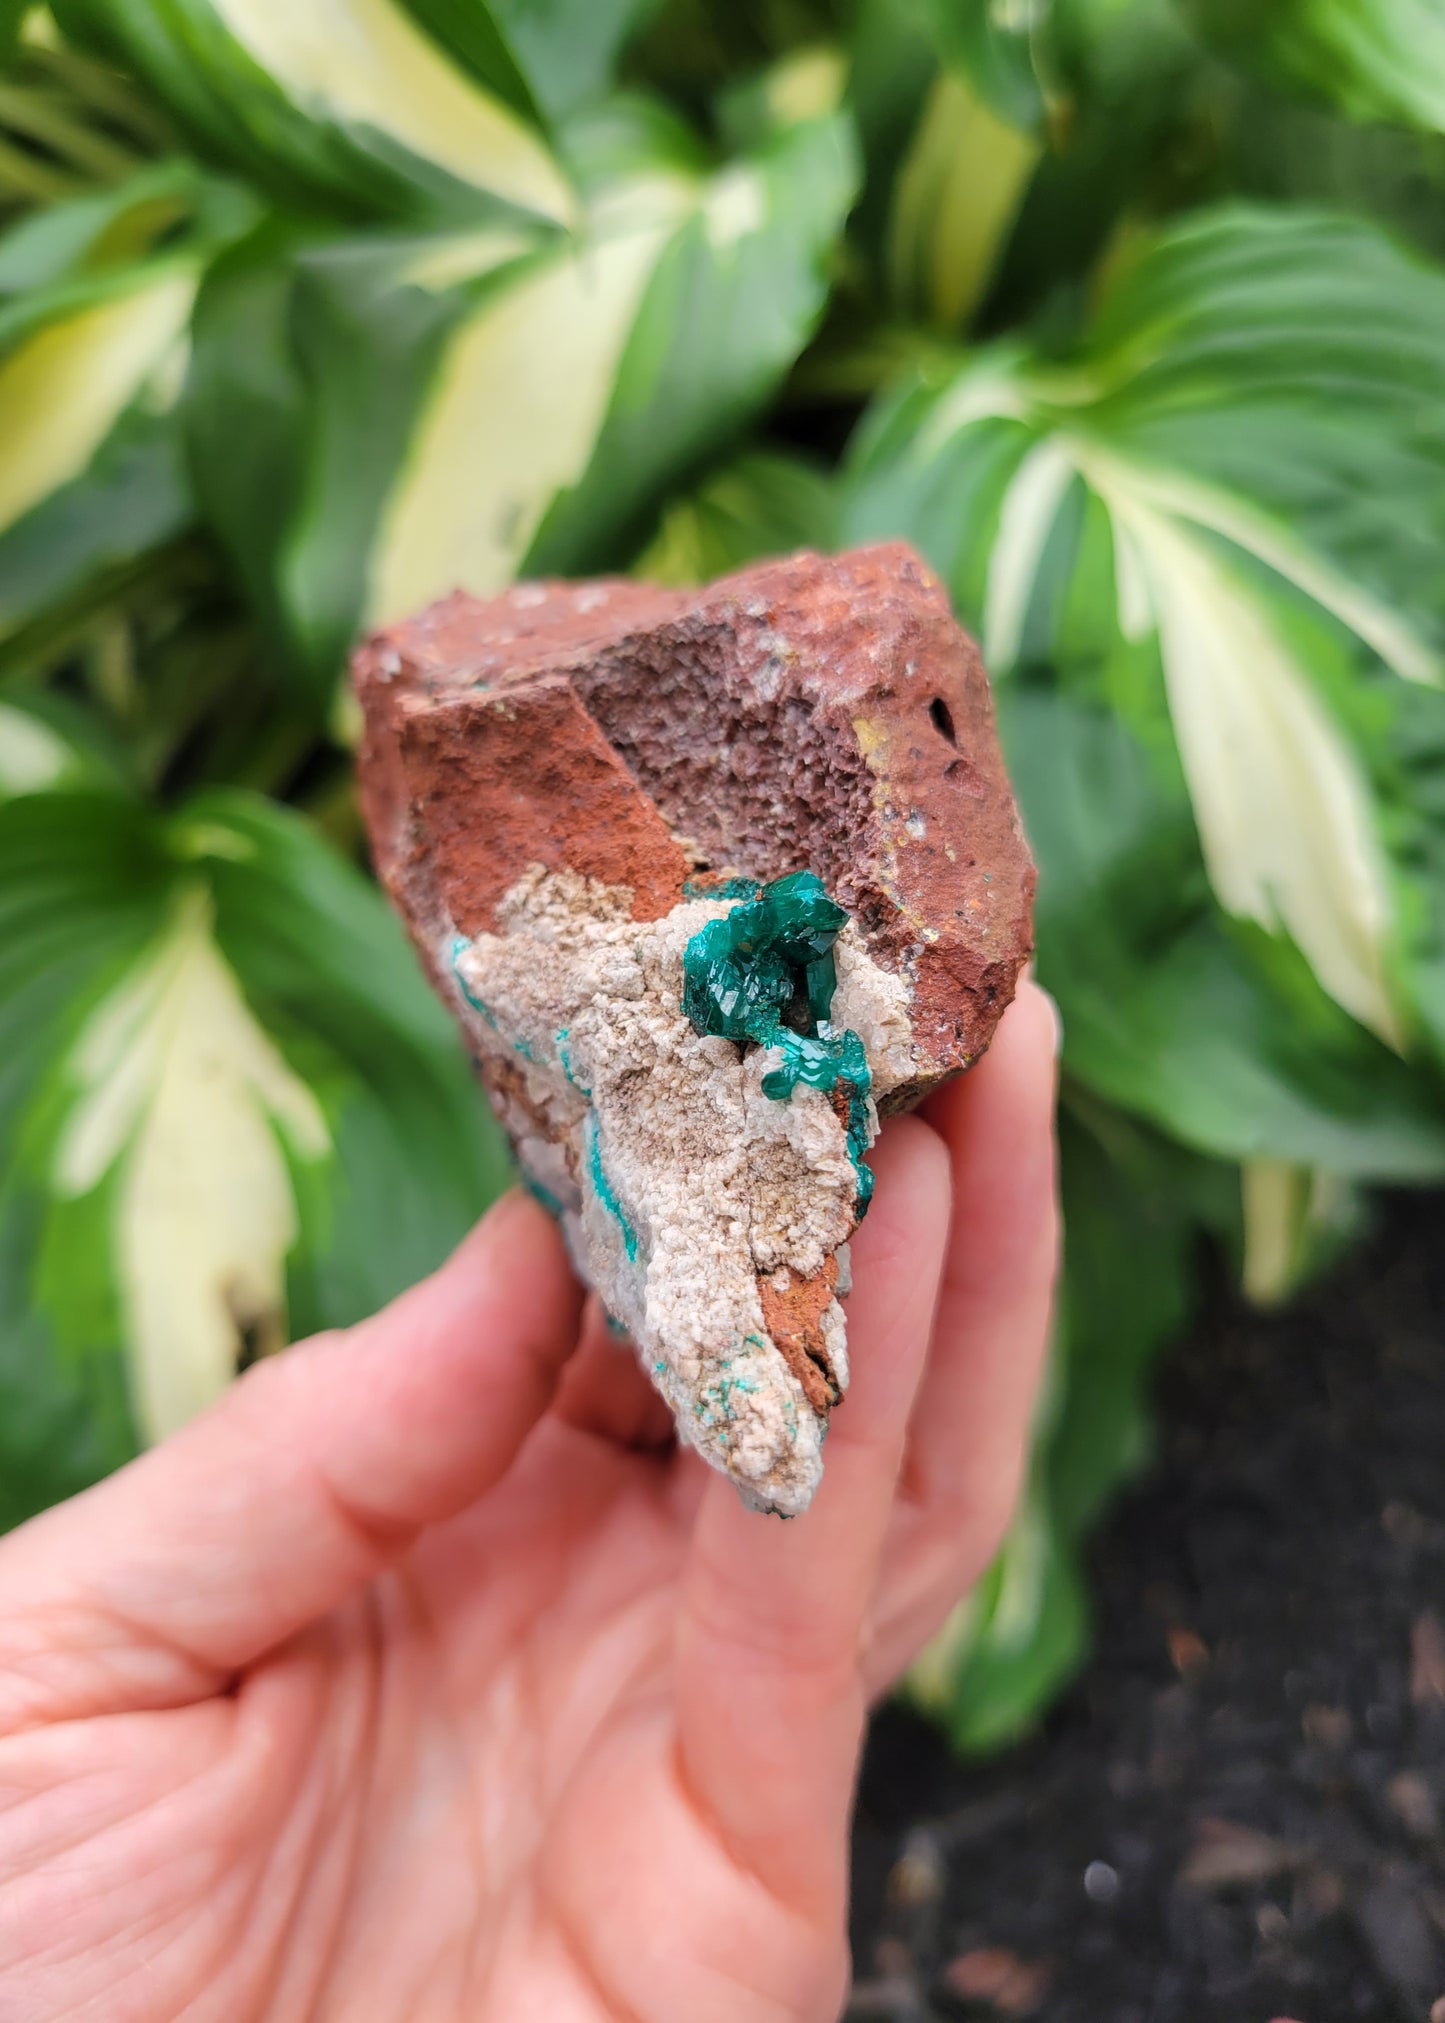 Dioptase Specimen from Congo (W 3 3/4 X D 2 1/4 X H 1 3/4 inches)